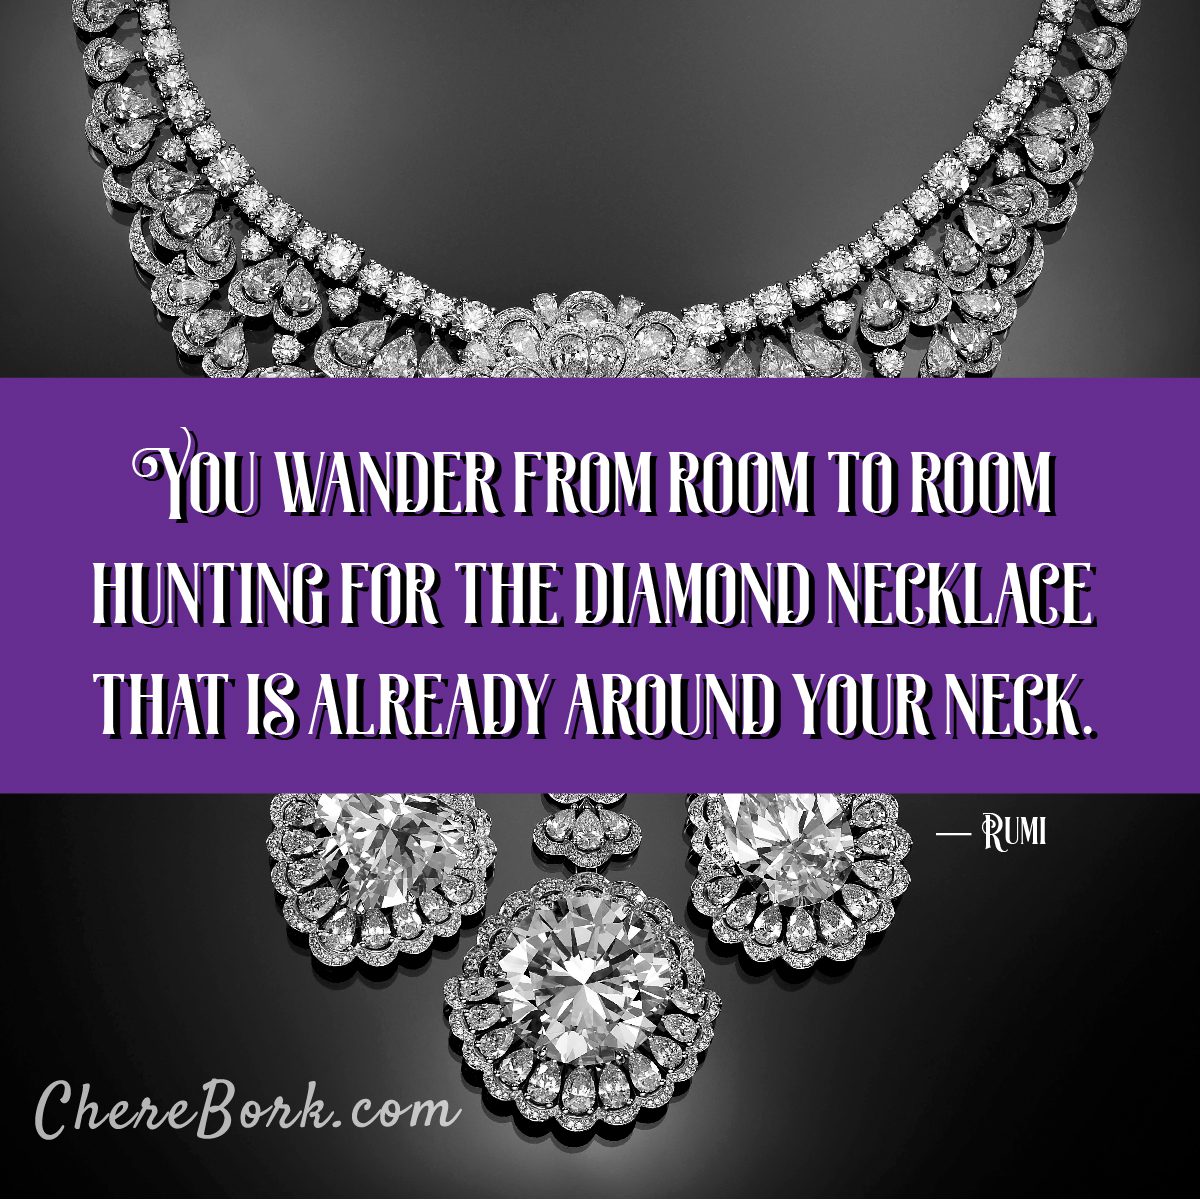 You wander from room to room hunting for the diamond necklace that is already around your neck. -Rumi